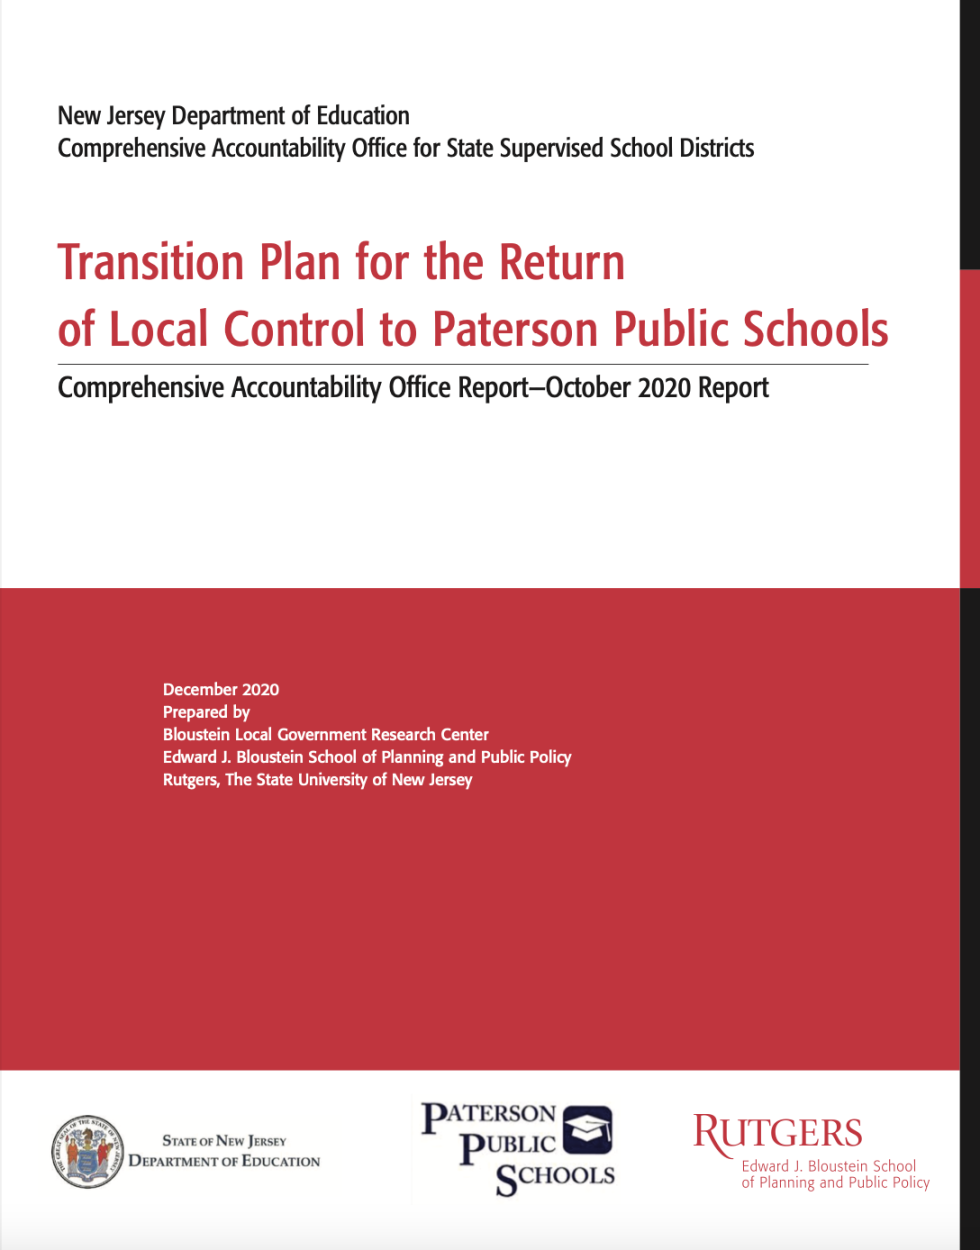 Transition Plan for the Return of Local Control to Paterson Public